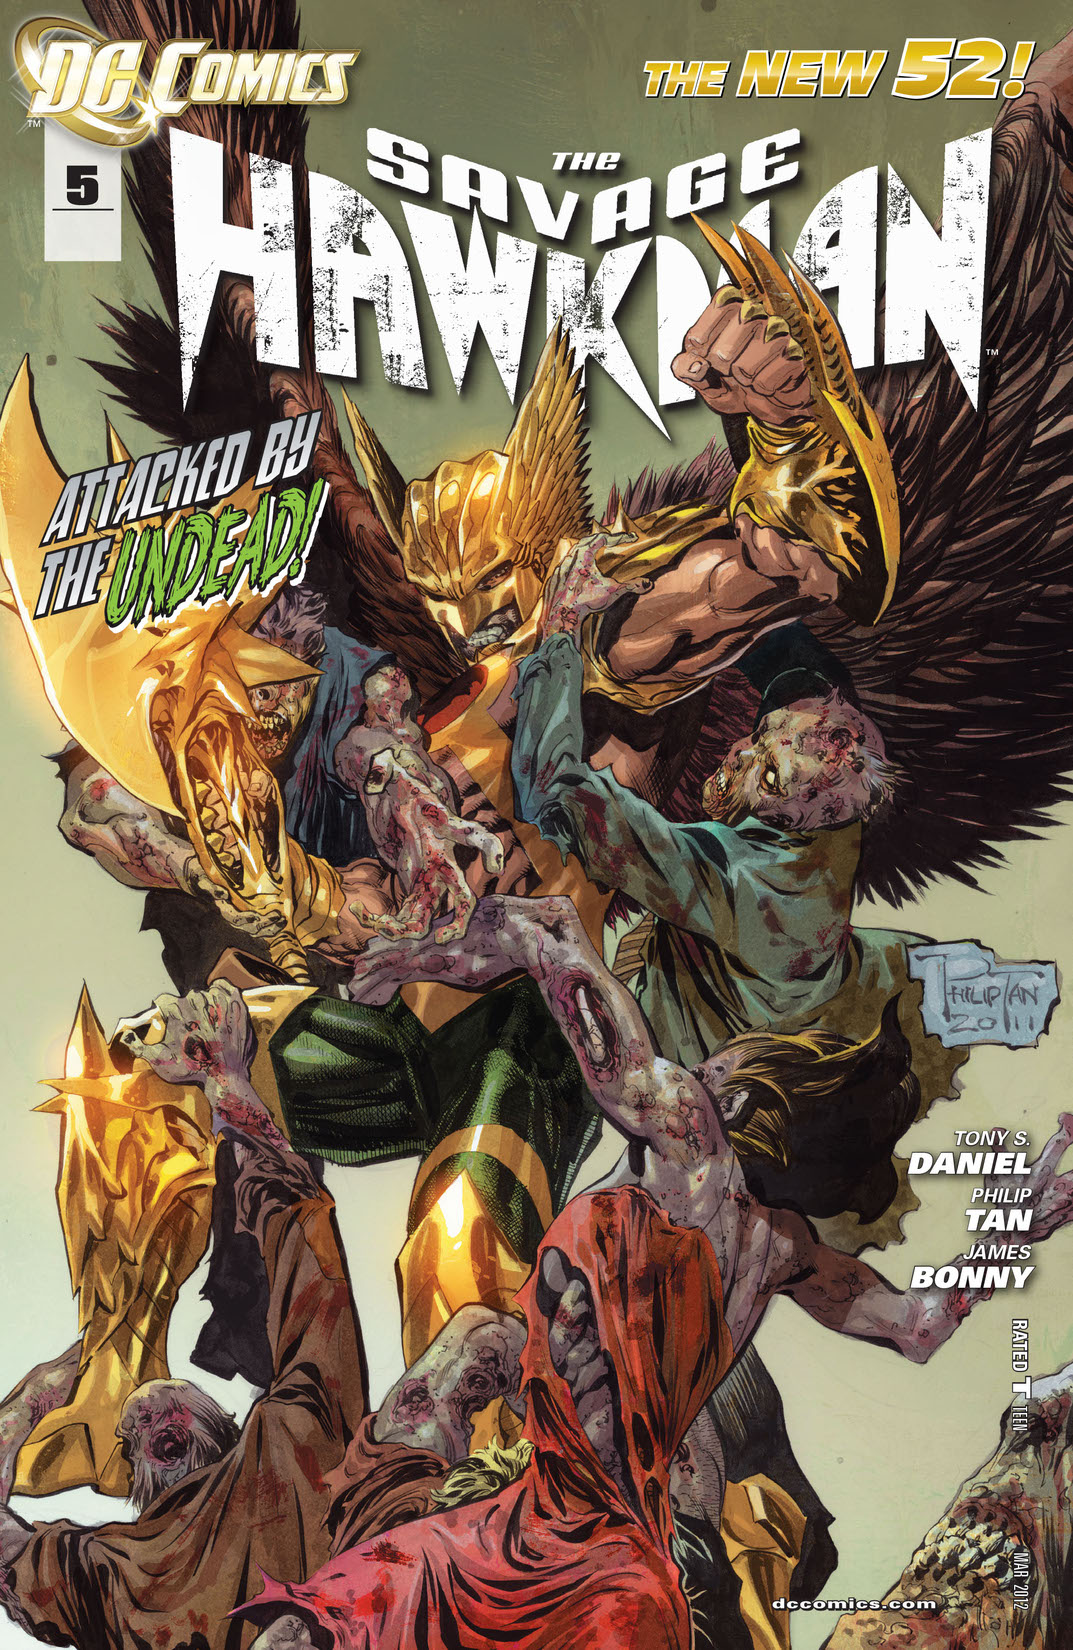 The Savage Hawkman #5 preview images